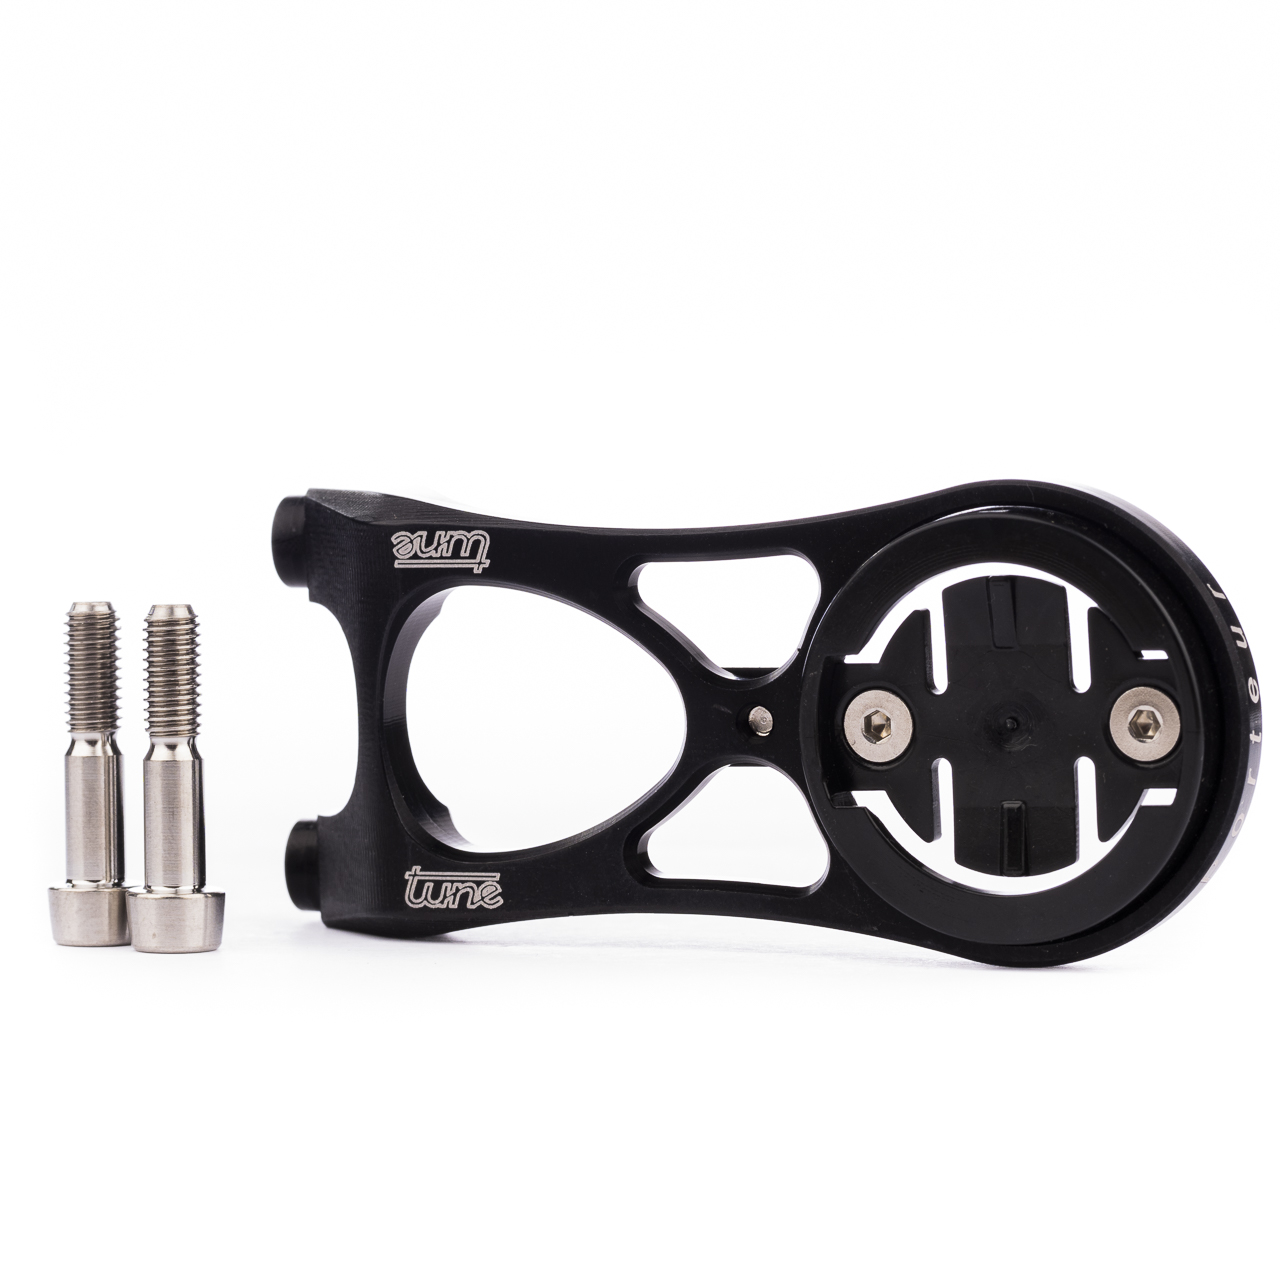 TUNE PORTEUR STEM MOUNT FOR CYCLING COMPUTERS • (DOP.MOC: €155)